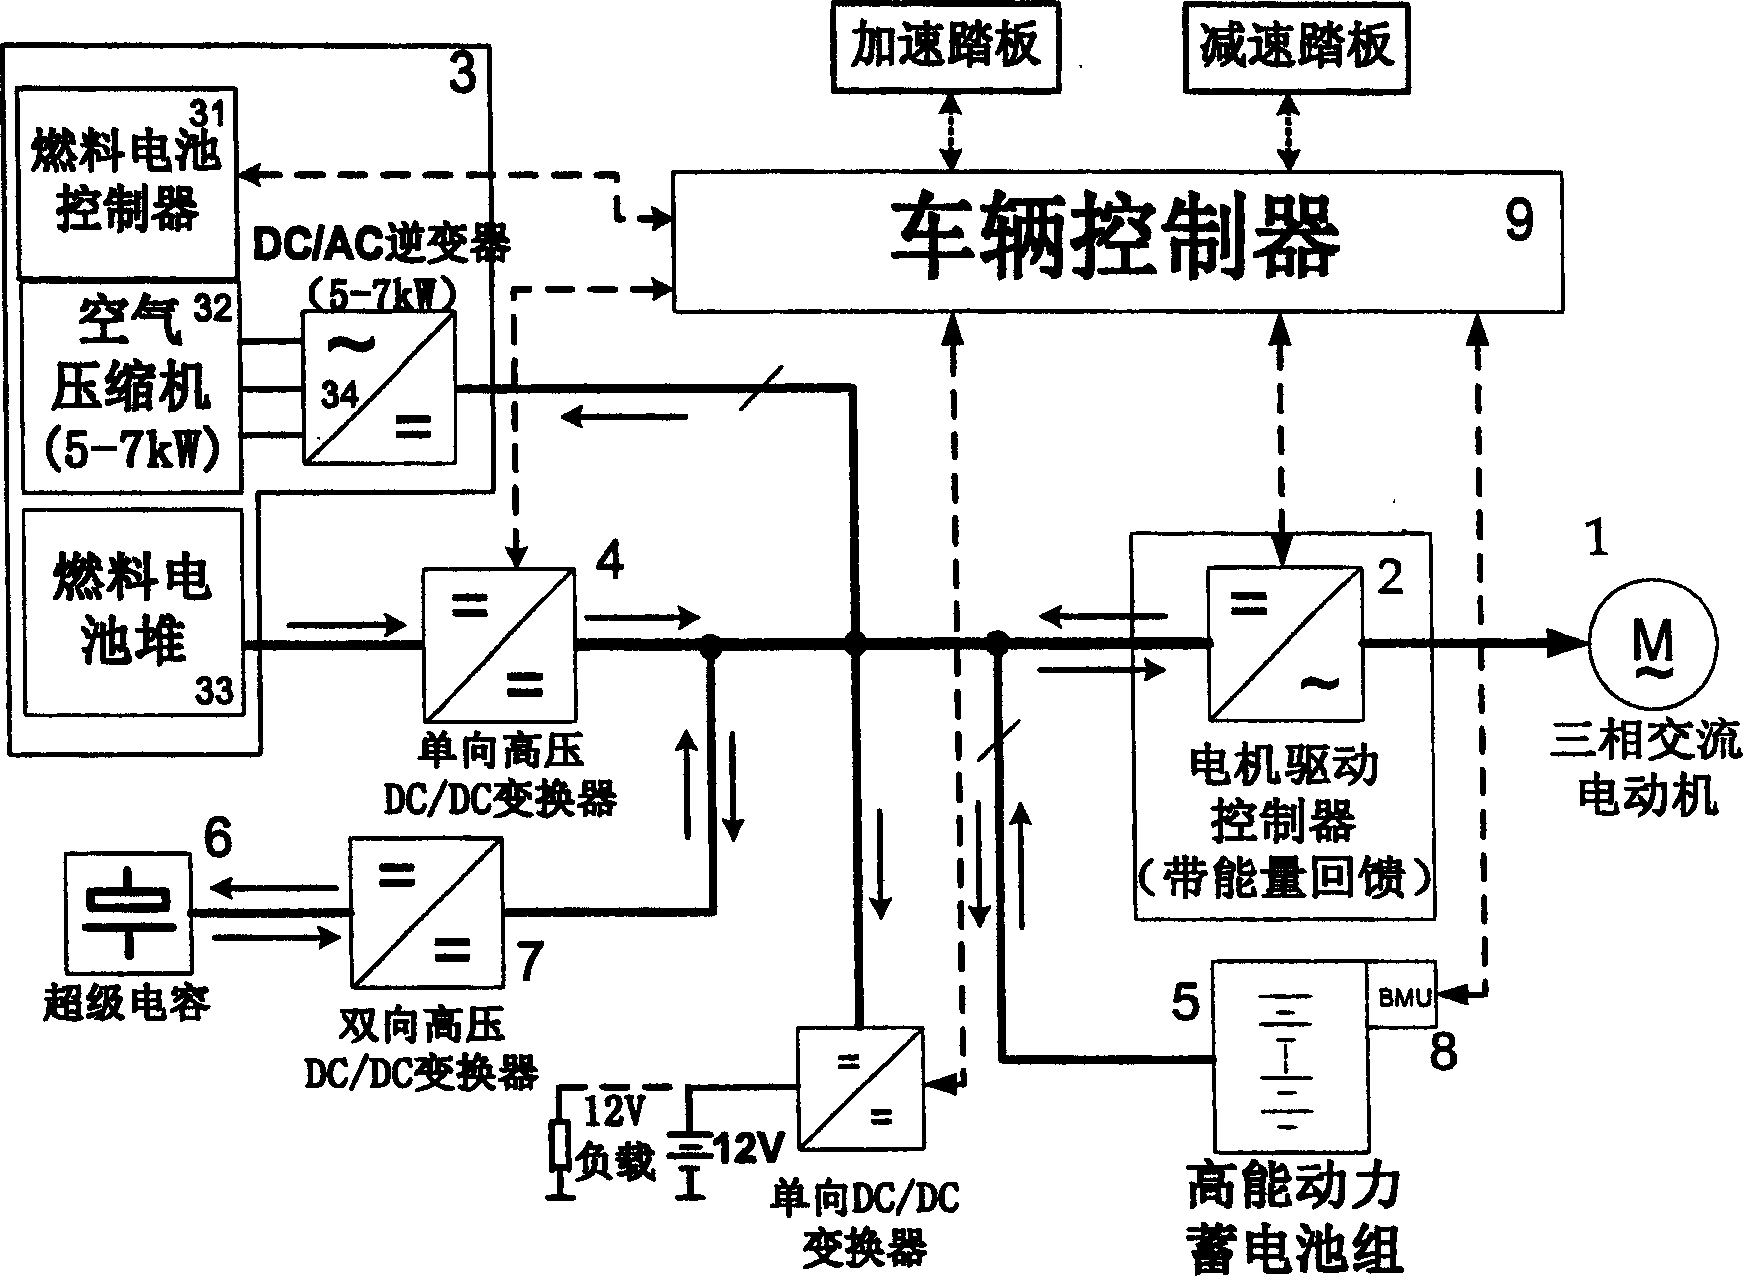 Power system of electric-electric mixed fuel battery automobile